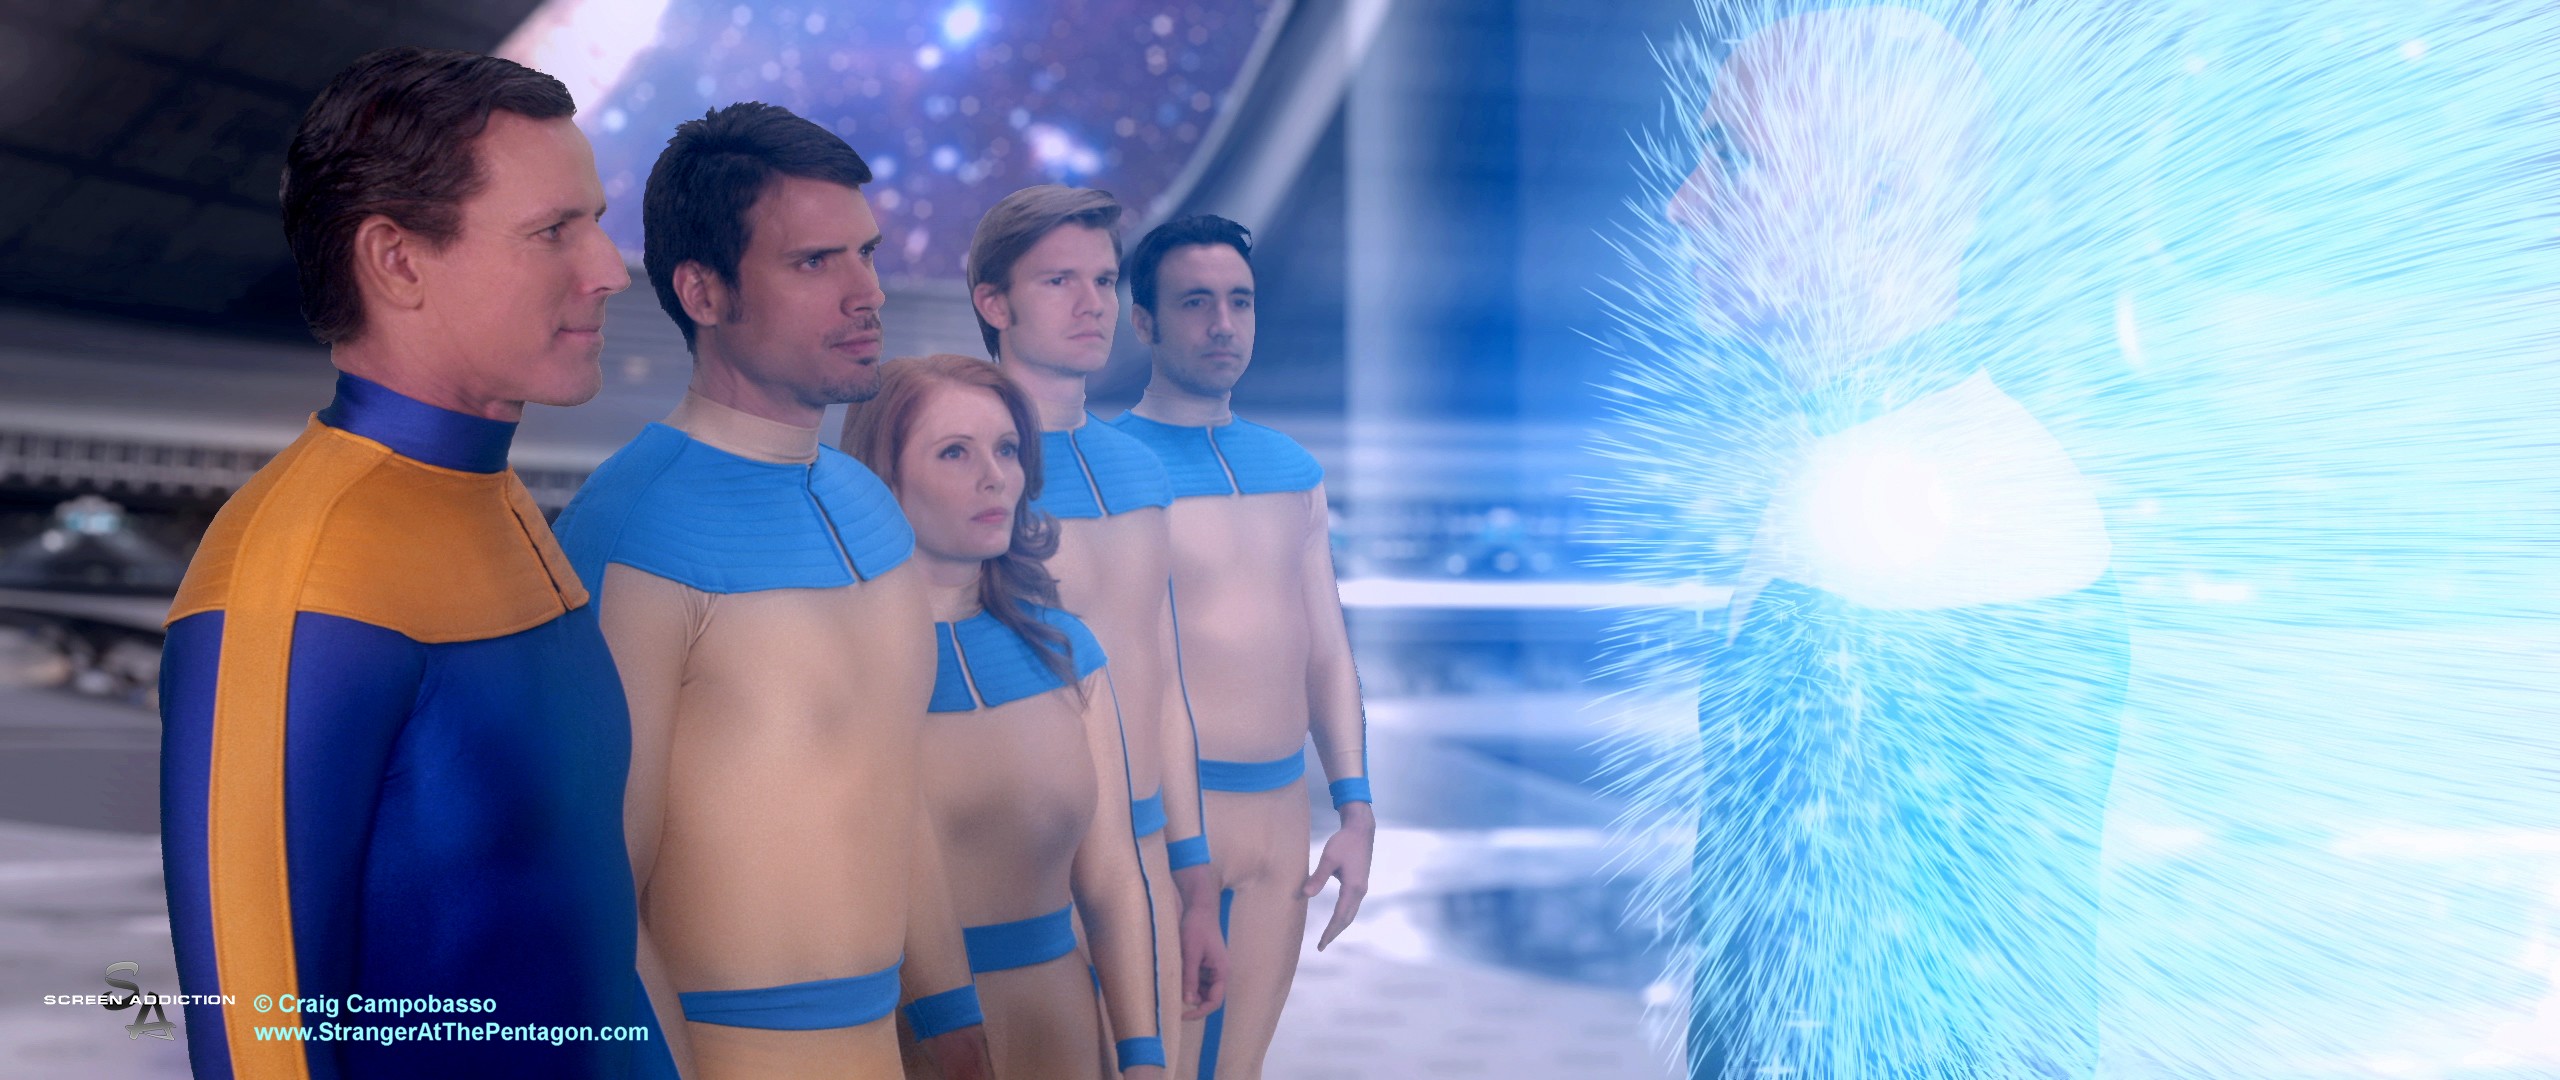 Uniah (Doug Mattingly) emerges from a Merkabah vehicle to greet Valiant Thor (Jeff Joslin) and his Vice Commanders.